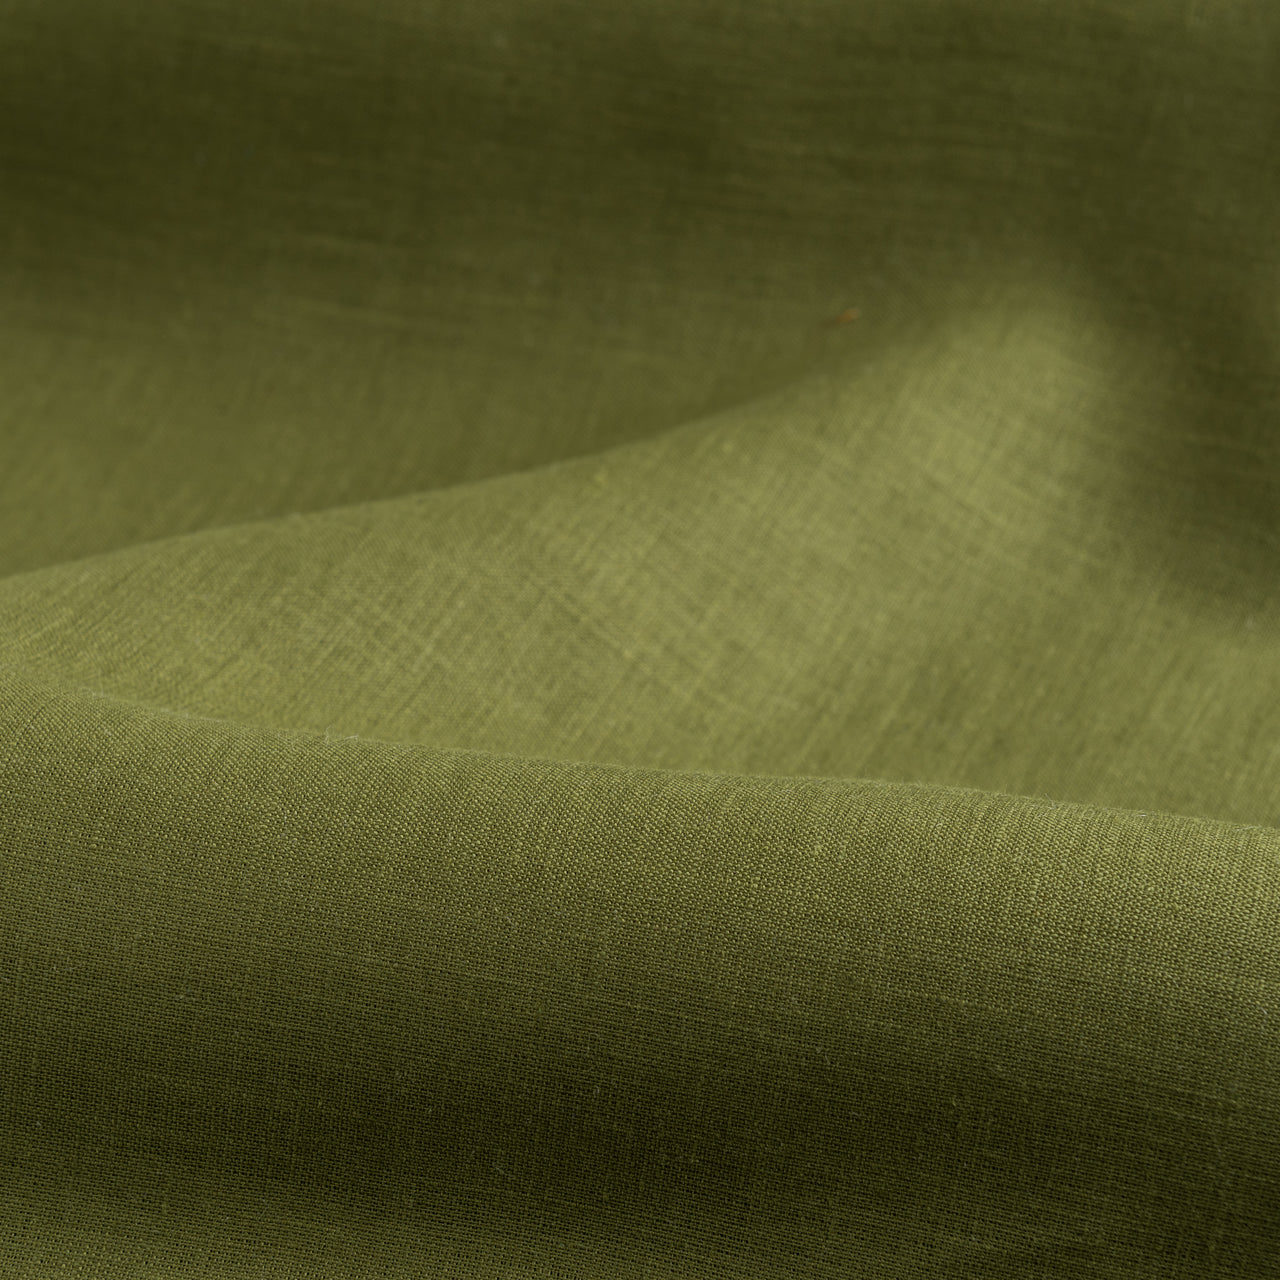 Moss Green Linen Fabric by the Yard - 100% French Natural - Width 52”